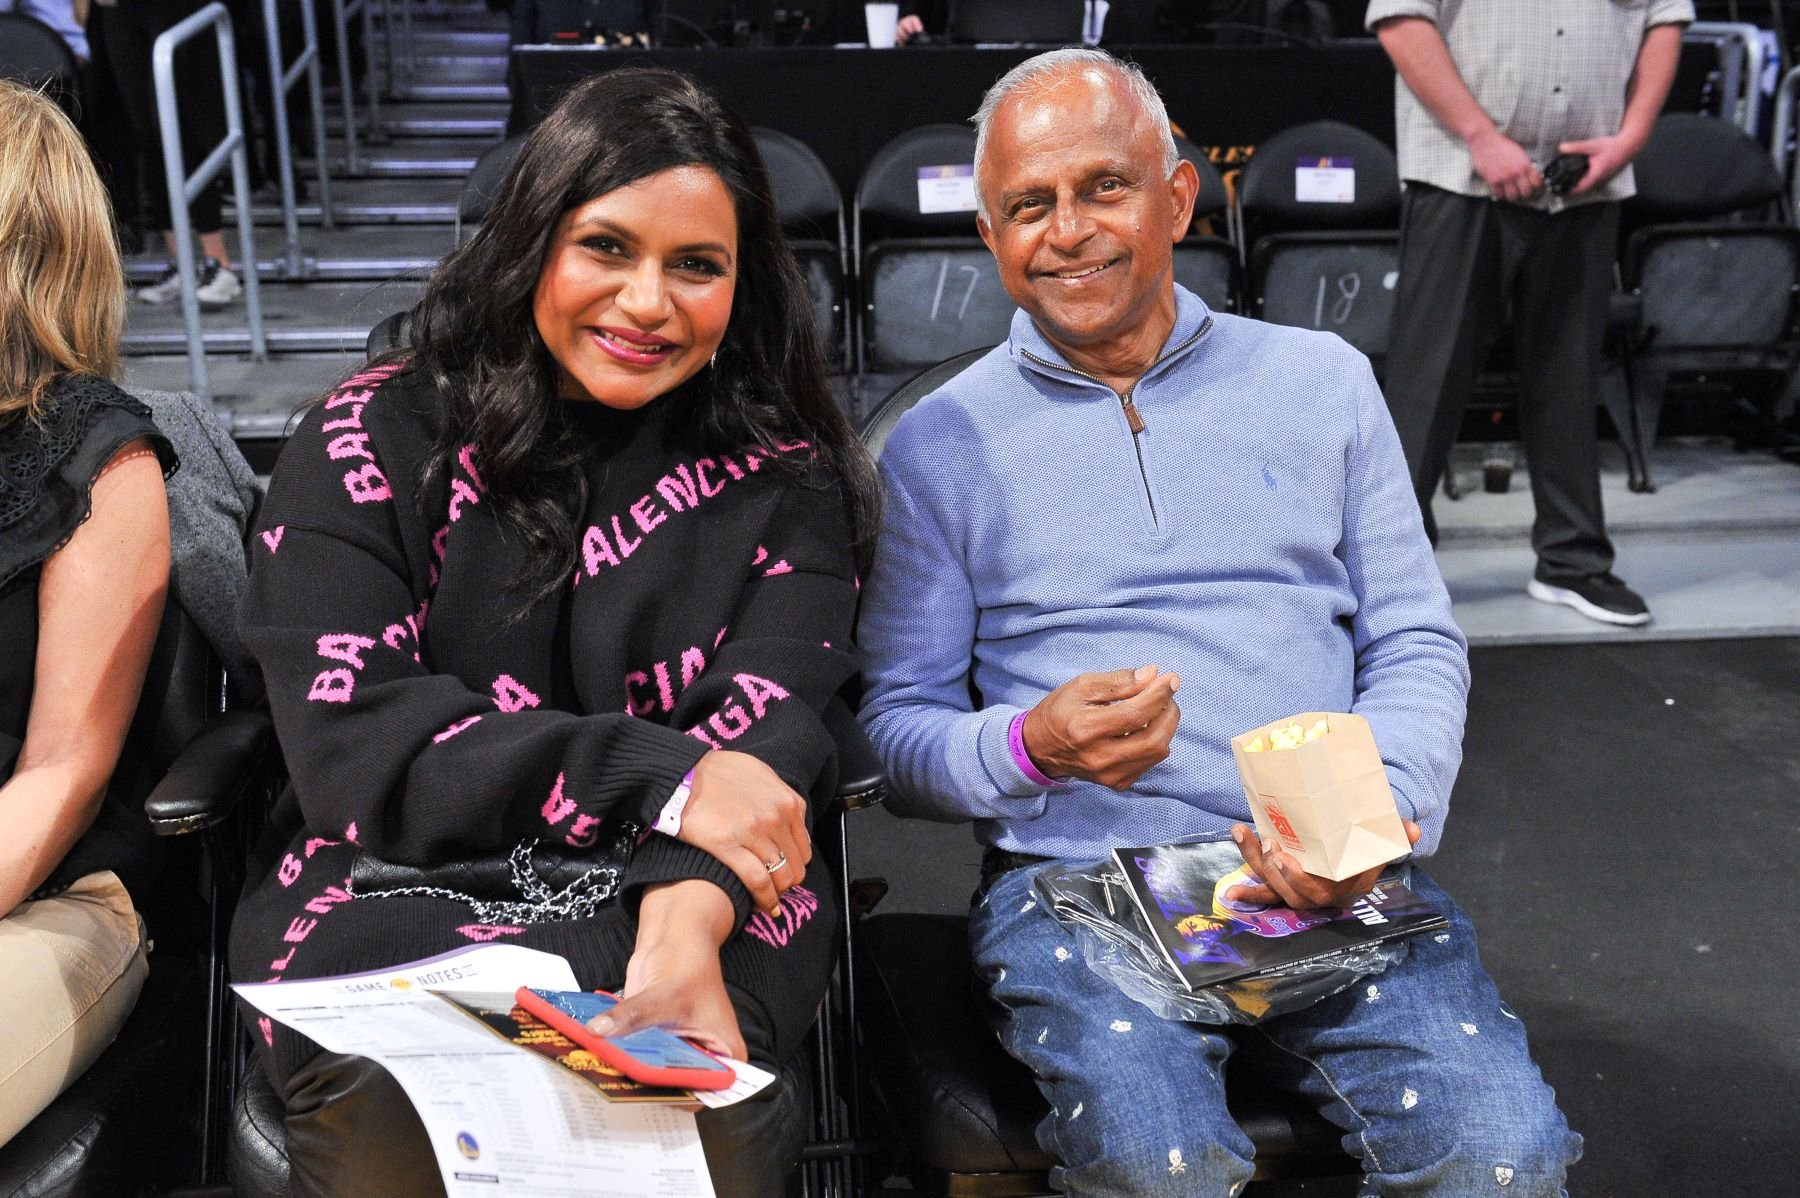 Mindy Kaling and her father